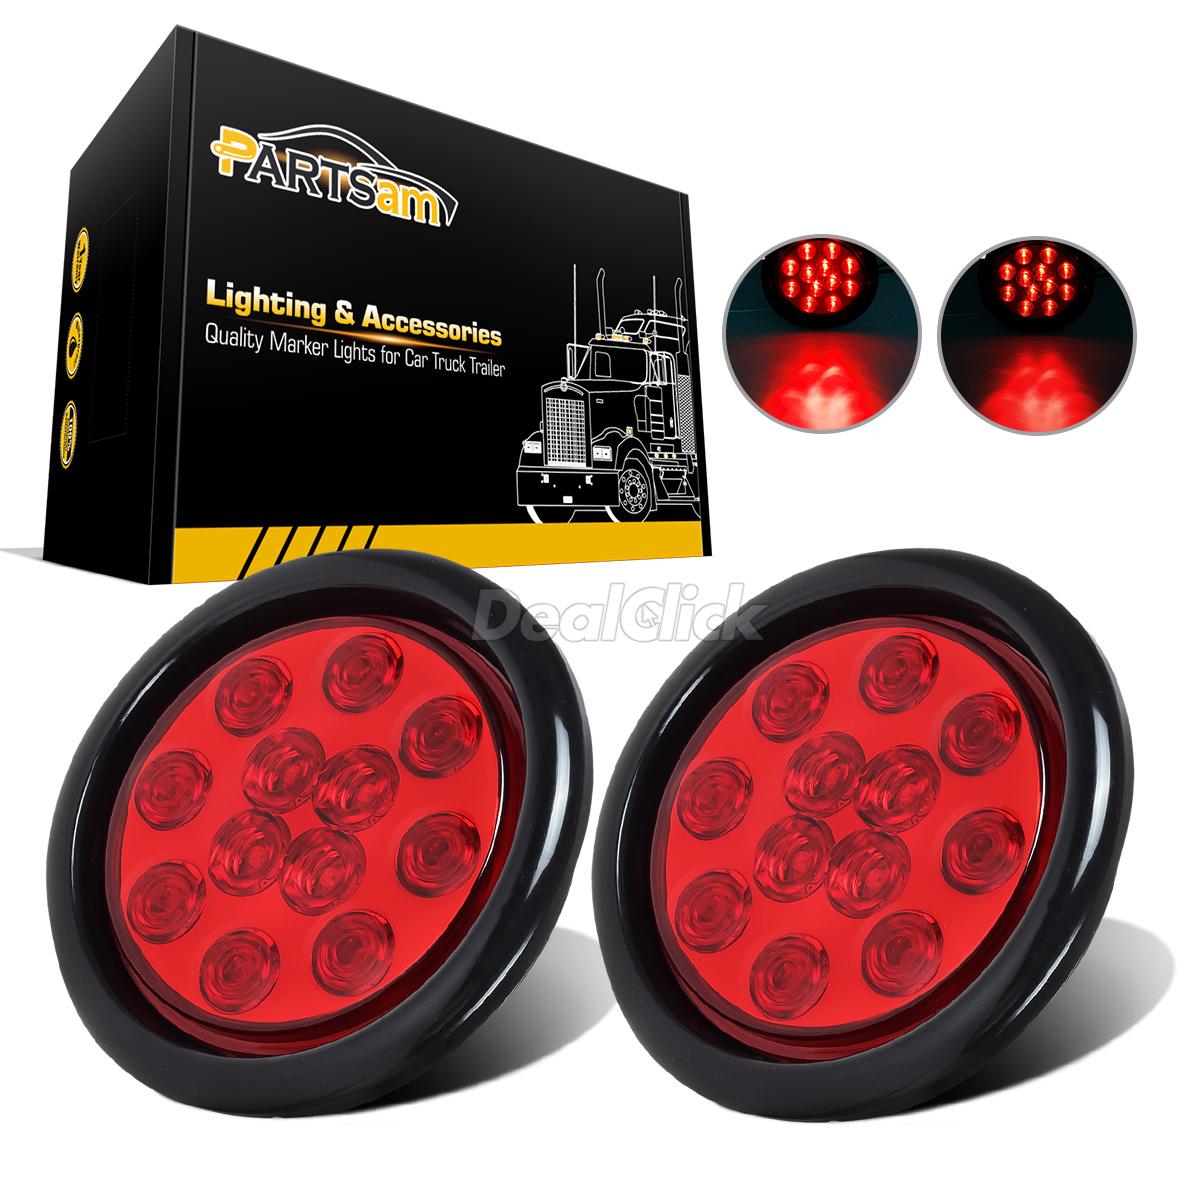 4/" Inch Red 12 LED Round Stop//Turn//Tail Truck Light with Grommet /& Wiring-Qty 4